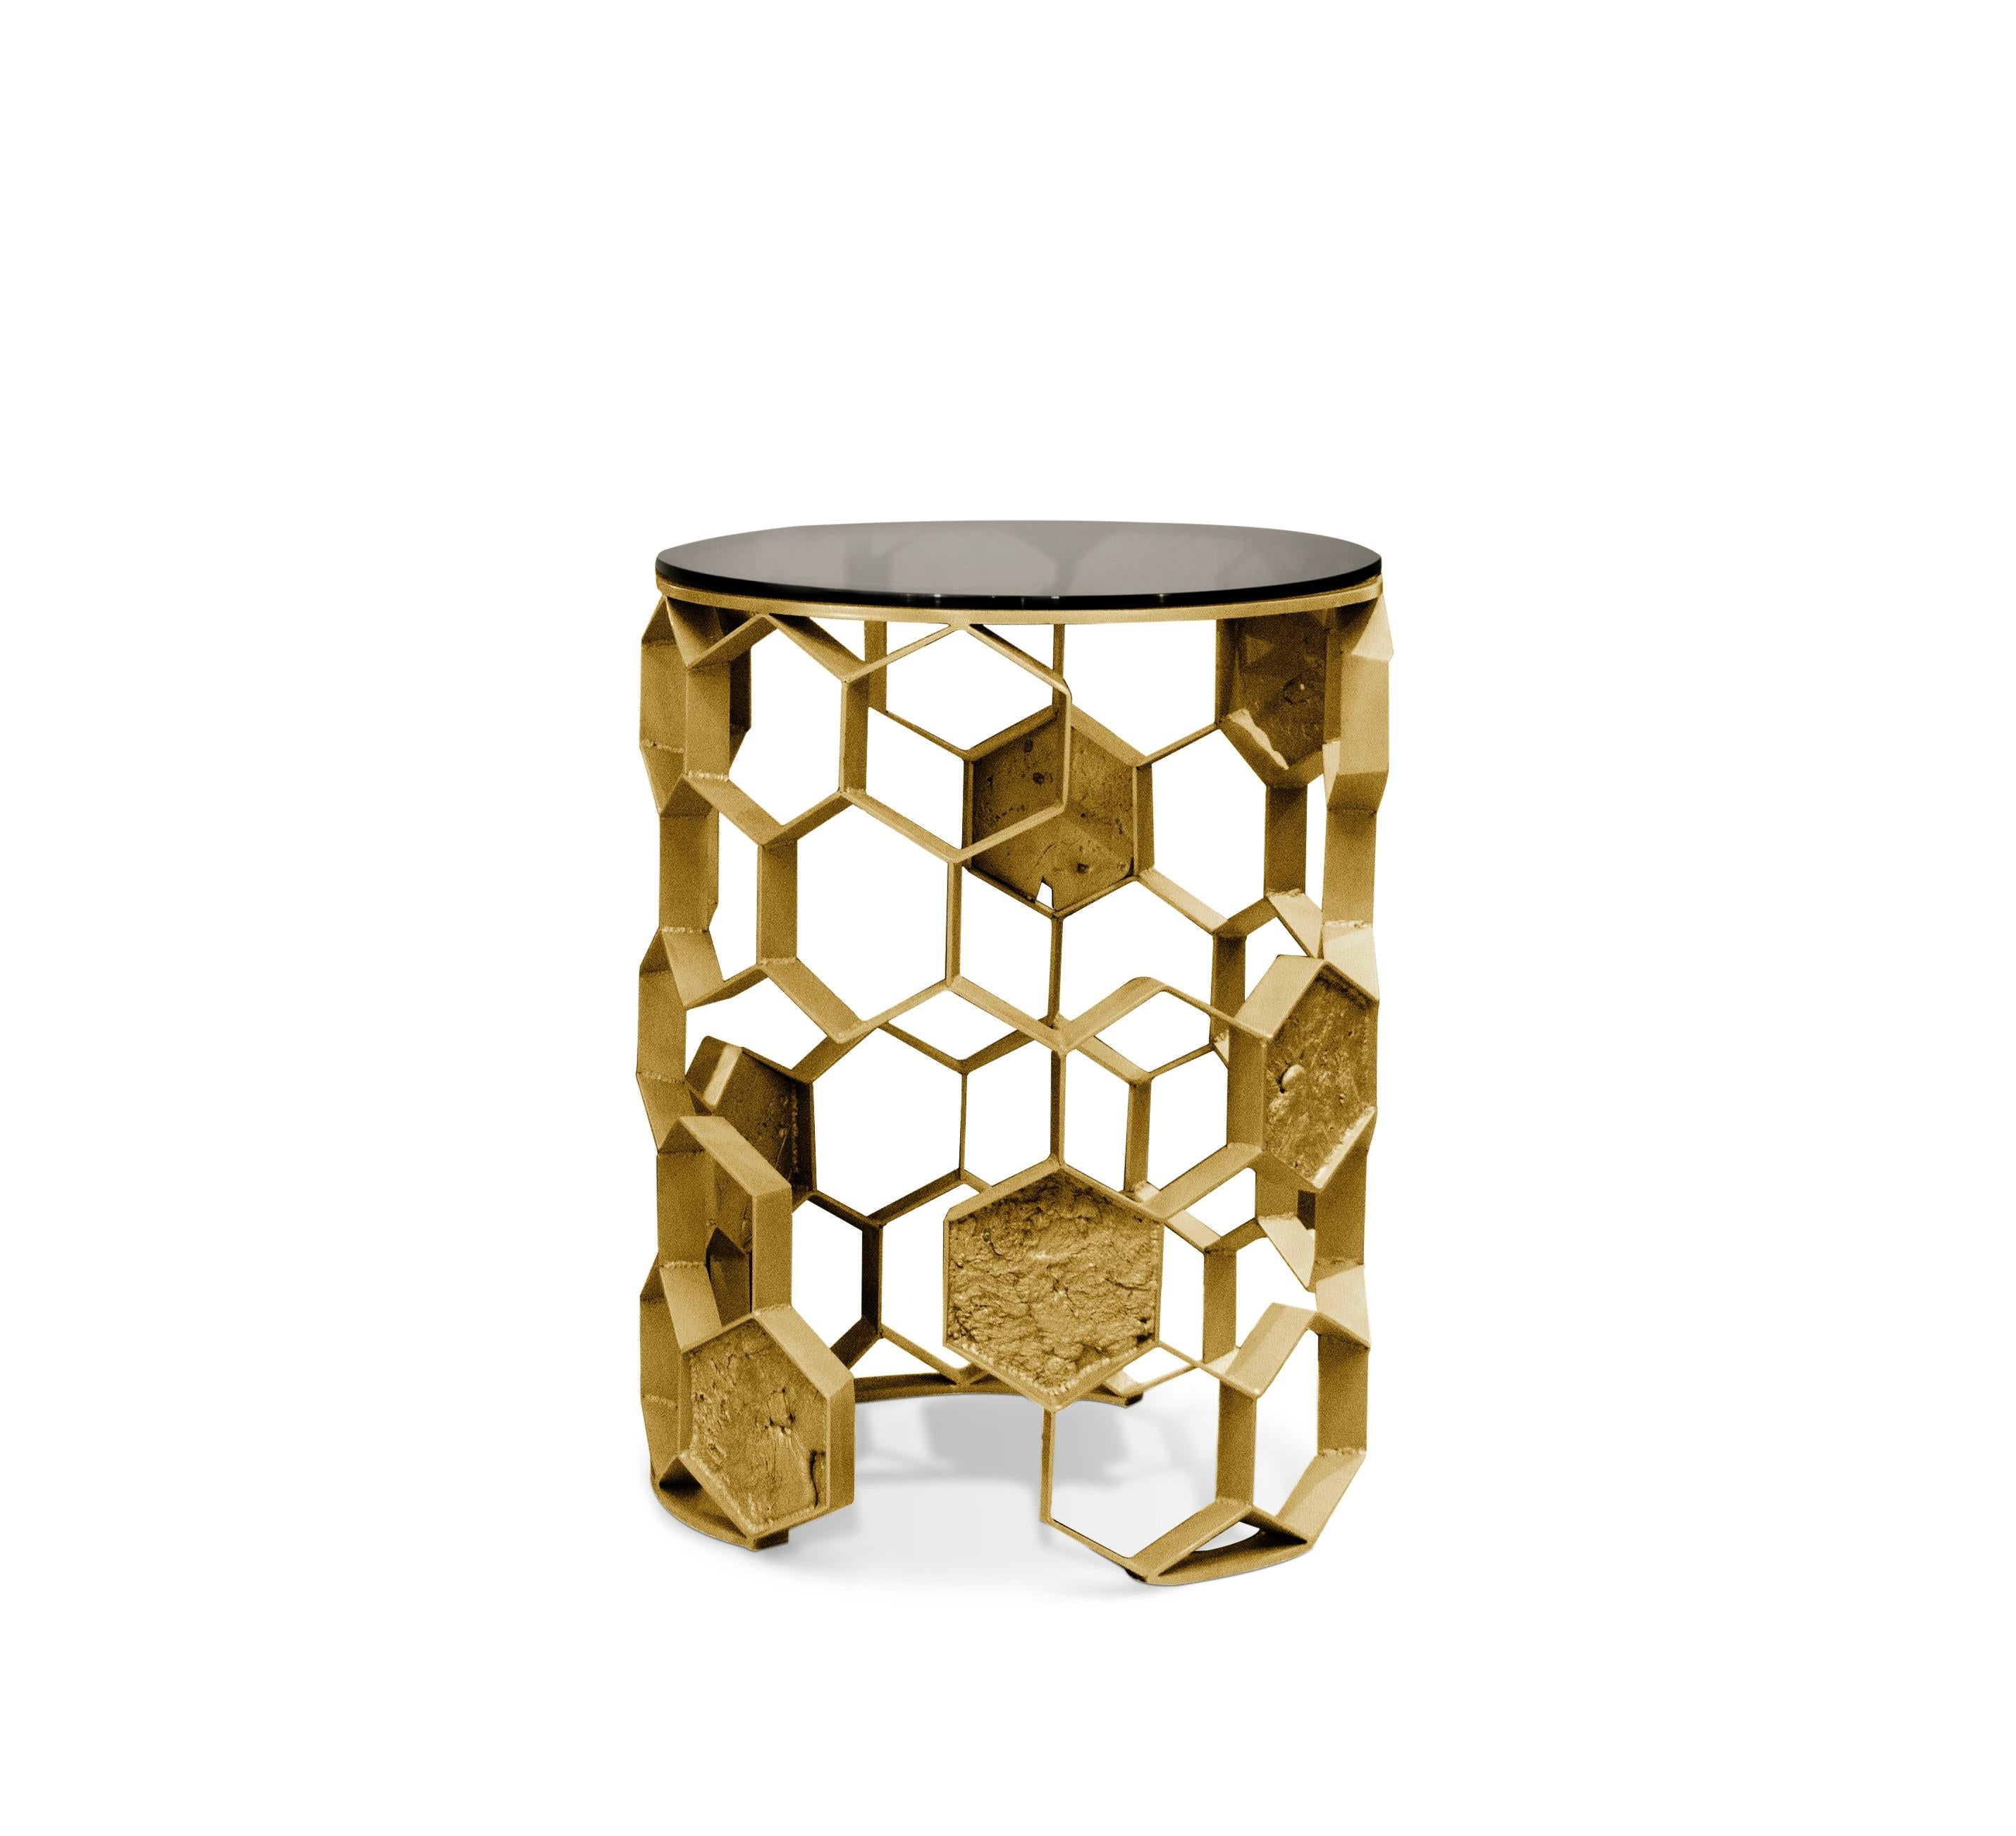 Manuka is one of the most unique and beneficial forms of honey in the world and made from a flower that only grows in New Zealand. The Manuka side table is an exquisite piece that resembles a glorious beehive. The aged matte brass structure and